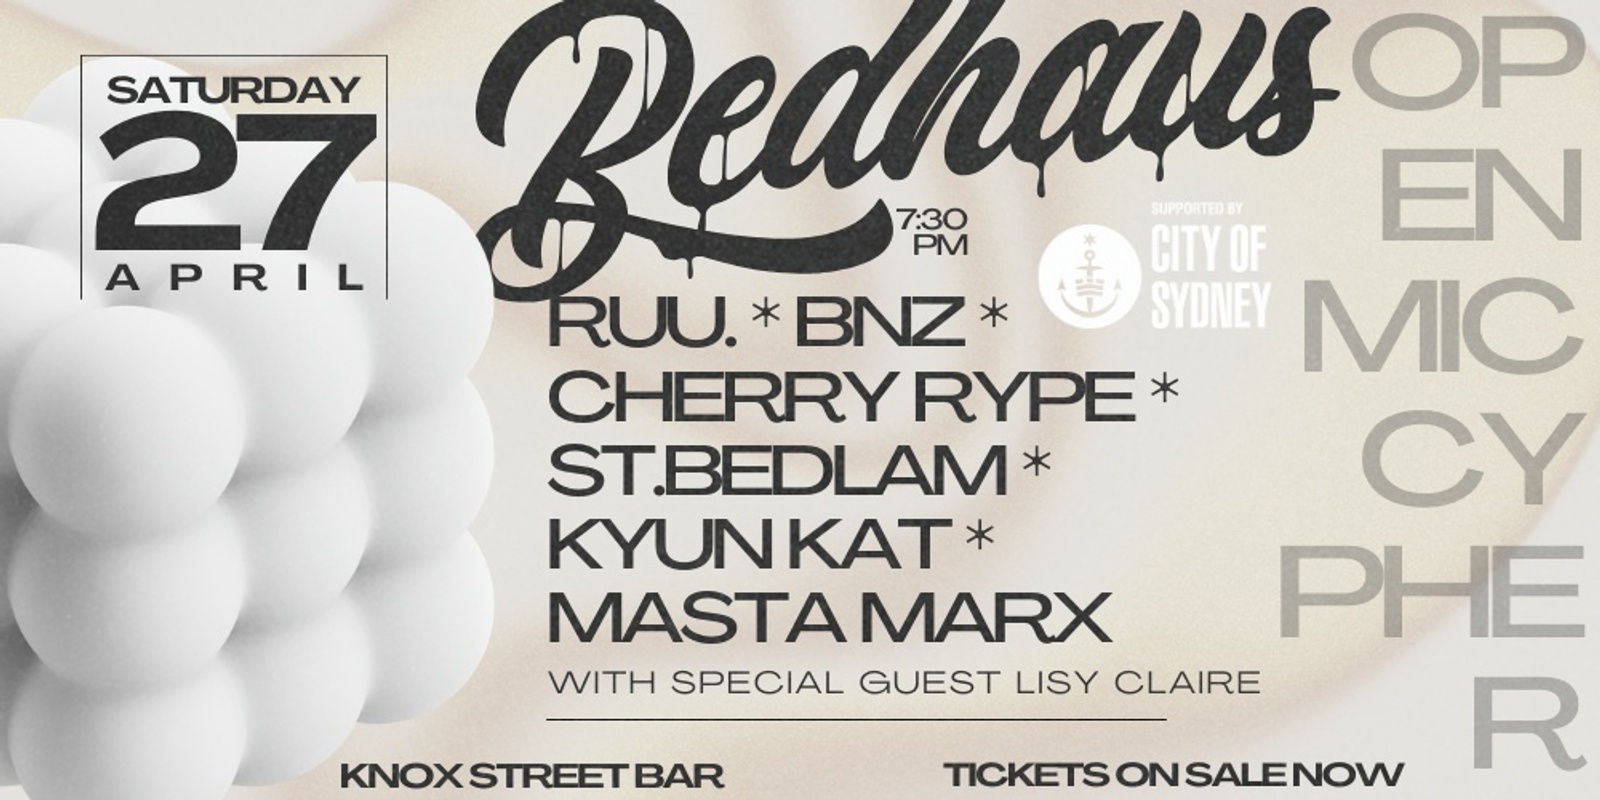 Banner image for BEDHAUS PARTY - APRIL 27